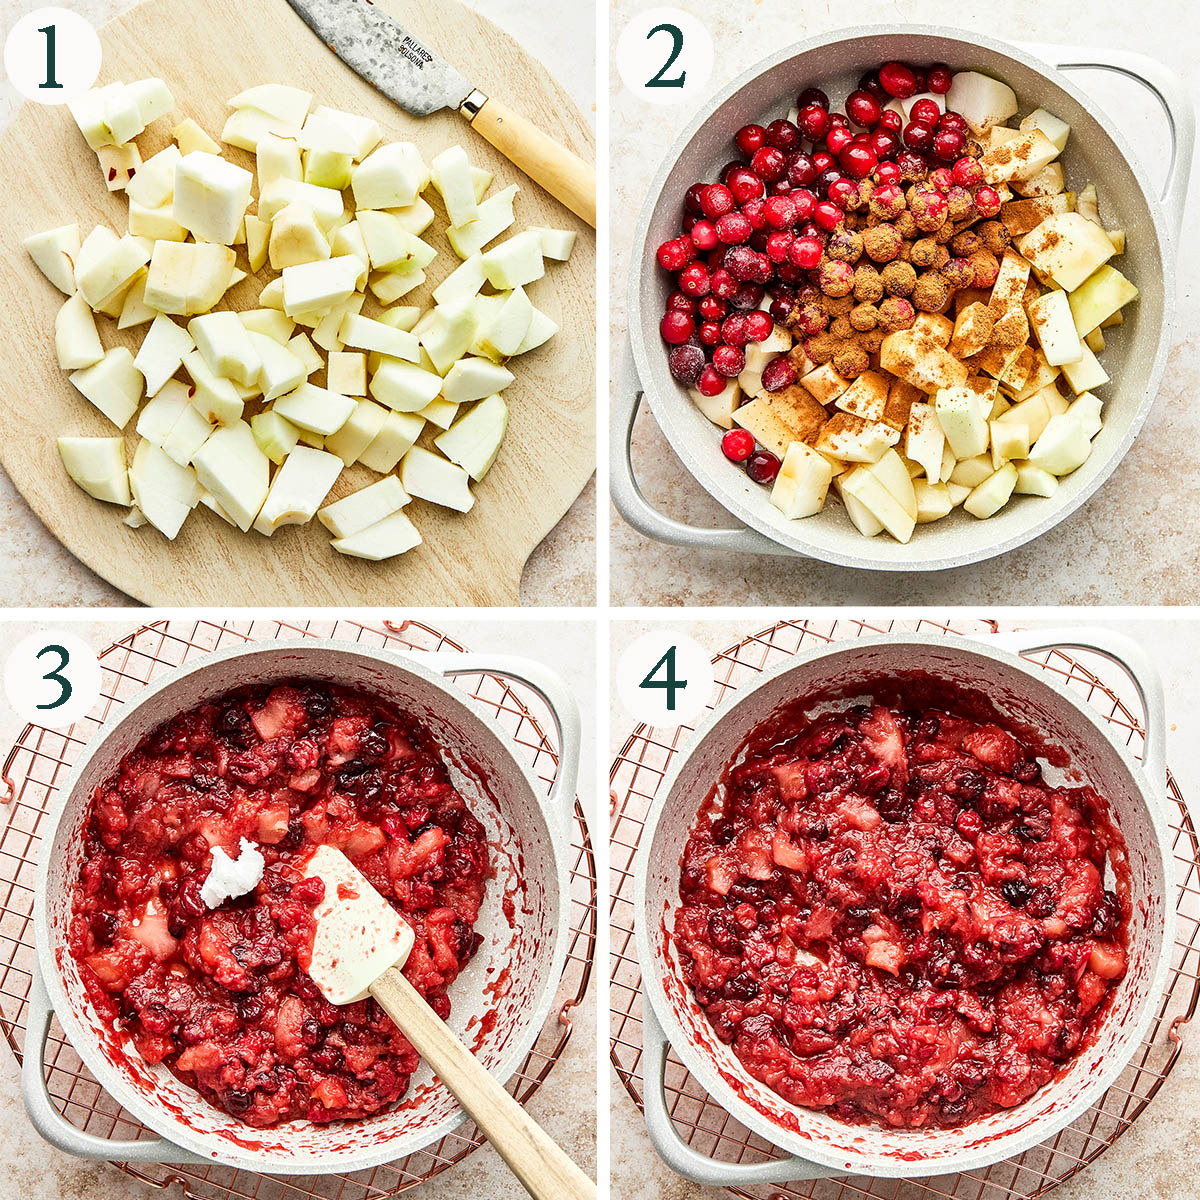 Cranberry apple sauce steps 1 to 4, preparing, cooking, and finished sauce.